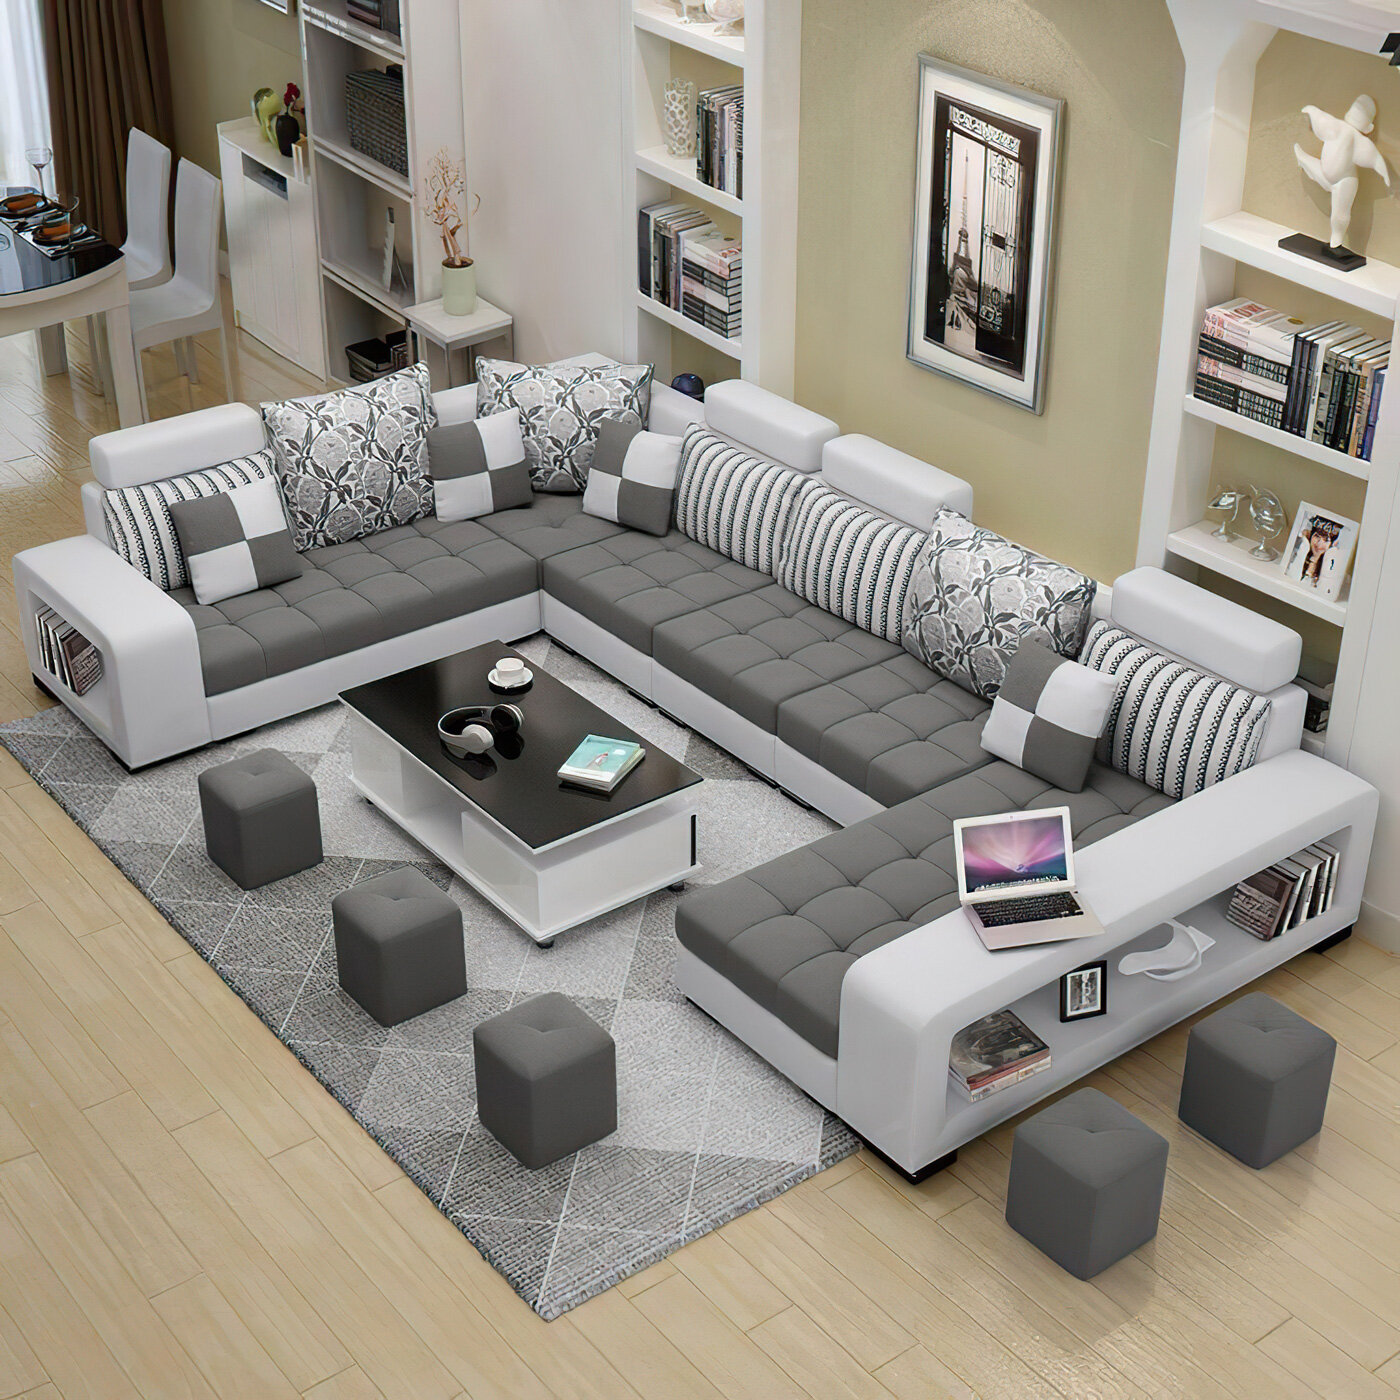 How to Style a Sectional–My Step by Step Process - Sarah Joy